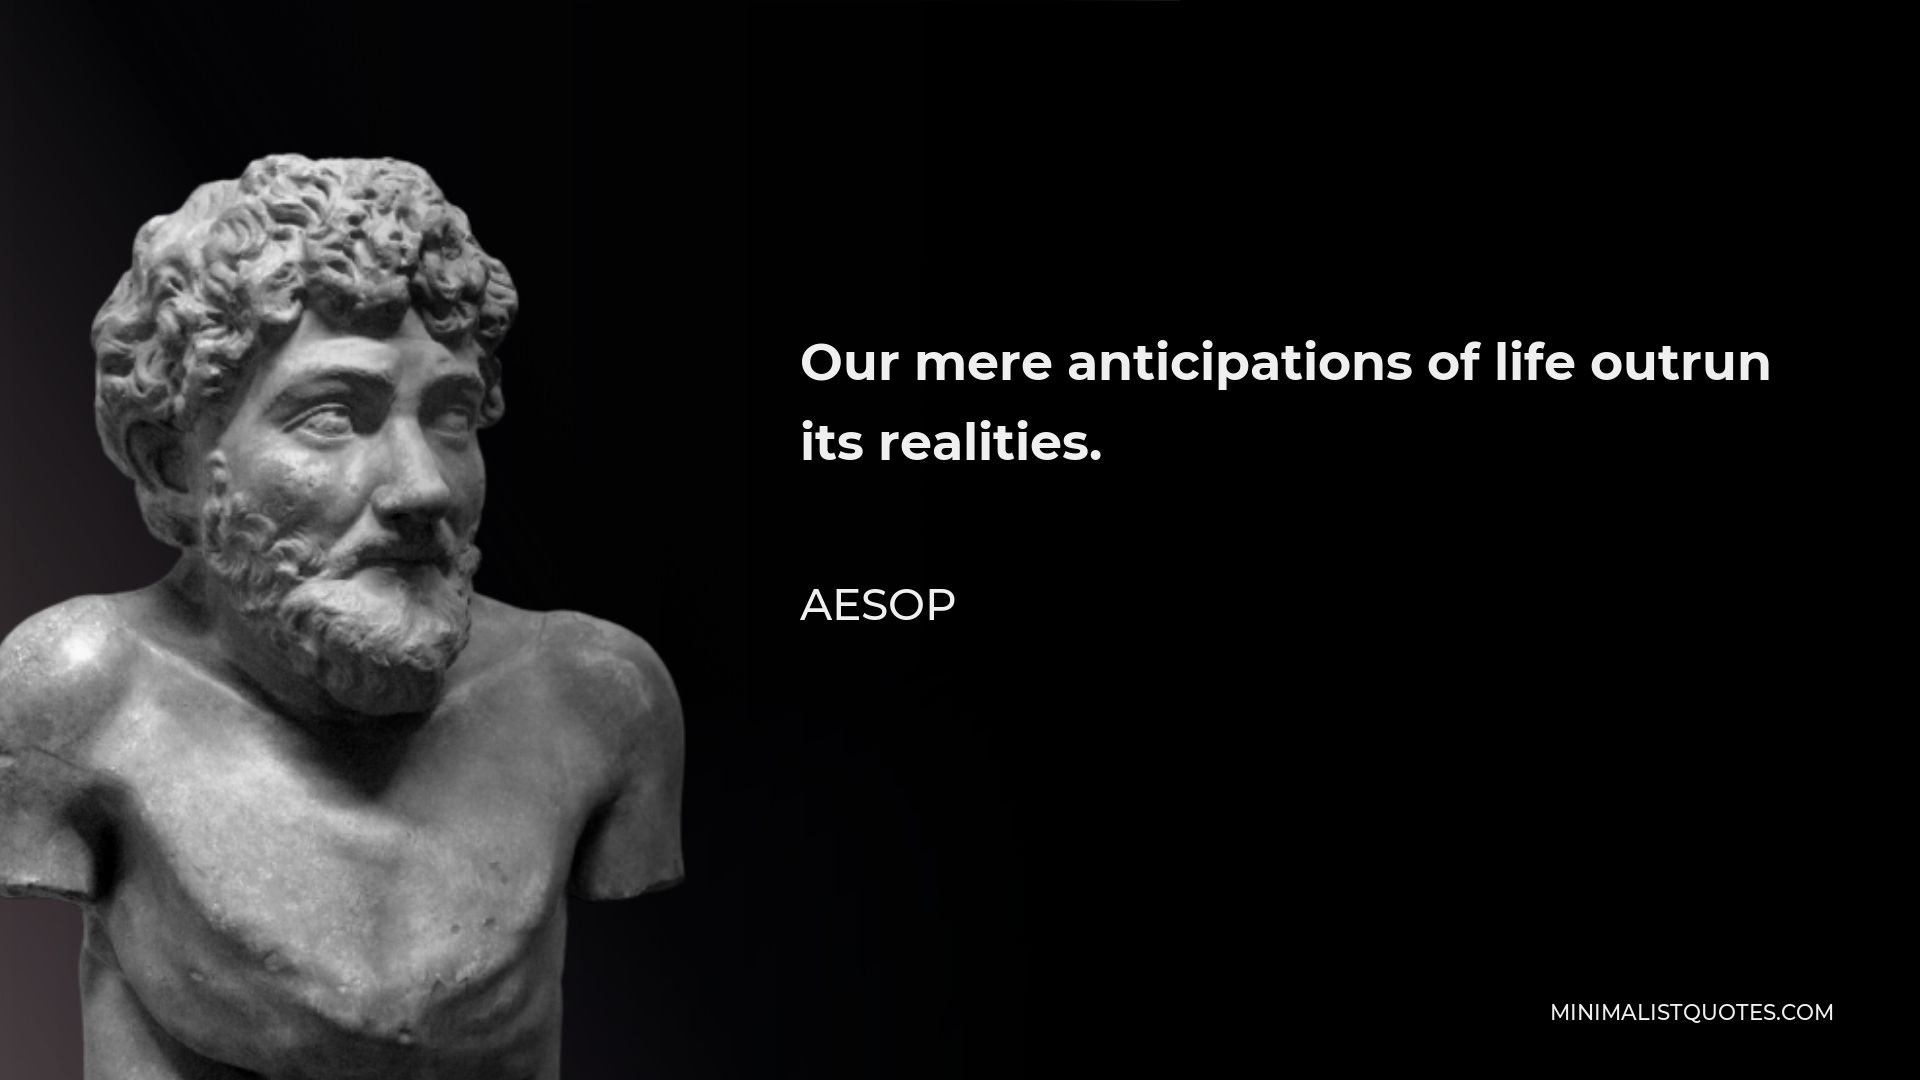 Aesop Quote - Our mere anticipations of life outrun its realities.